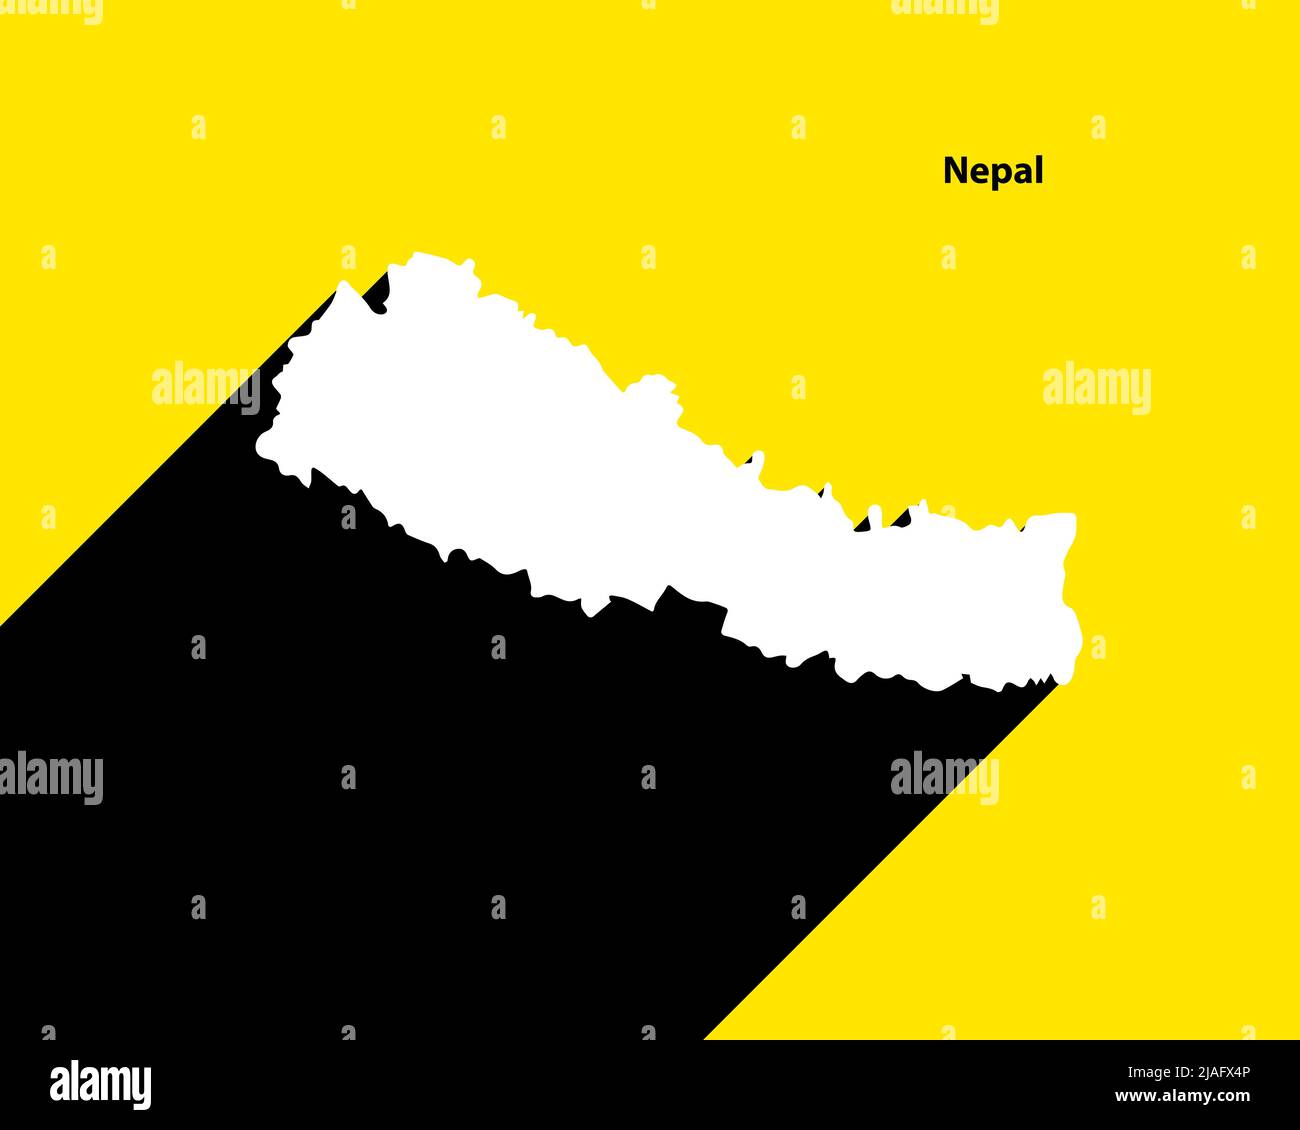 Nepal Map on retro poster with long shadow. Vintage sign easy to edit, manipulate, resize or colourise. Stock Vector